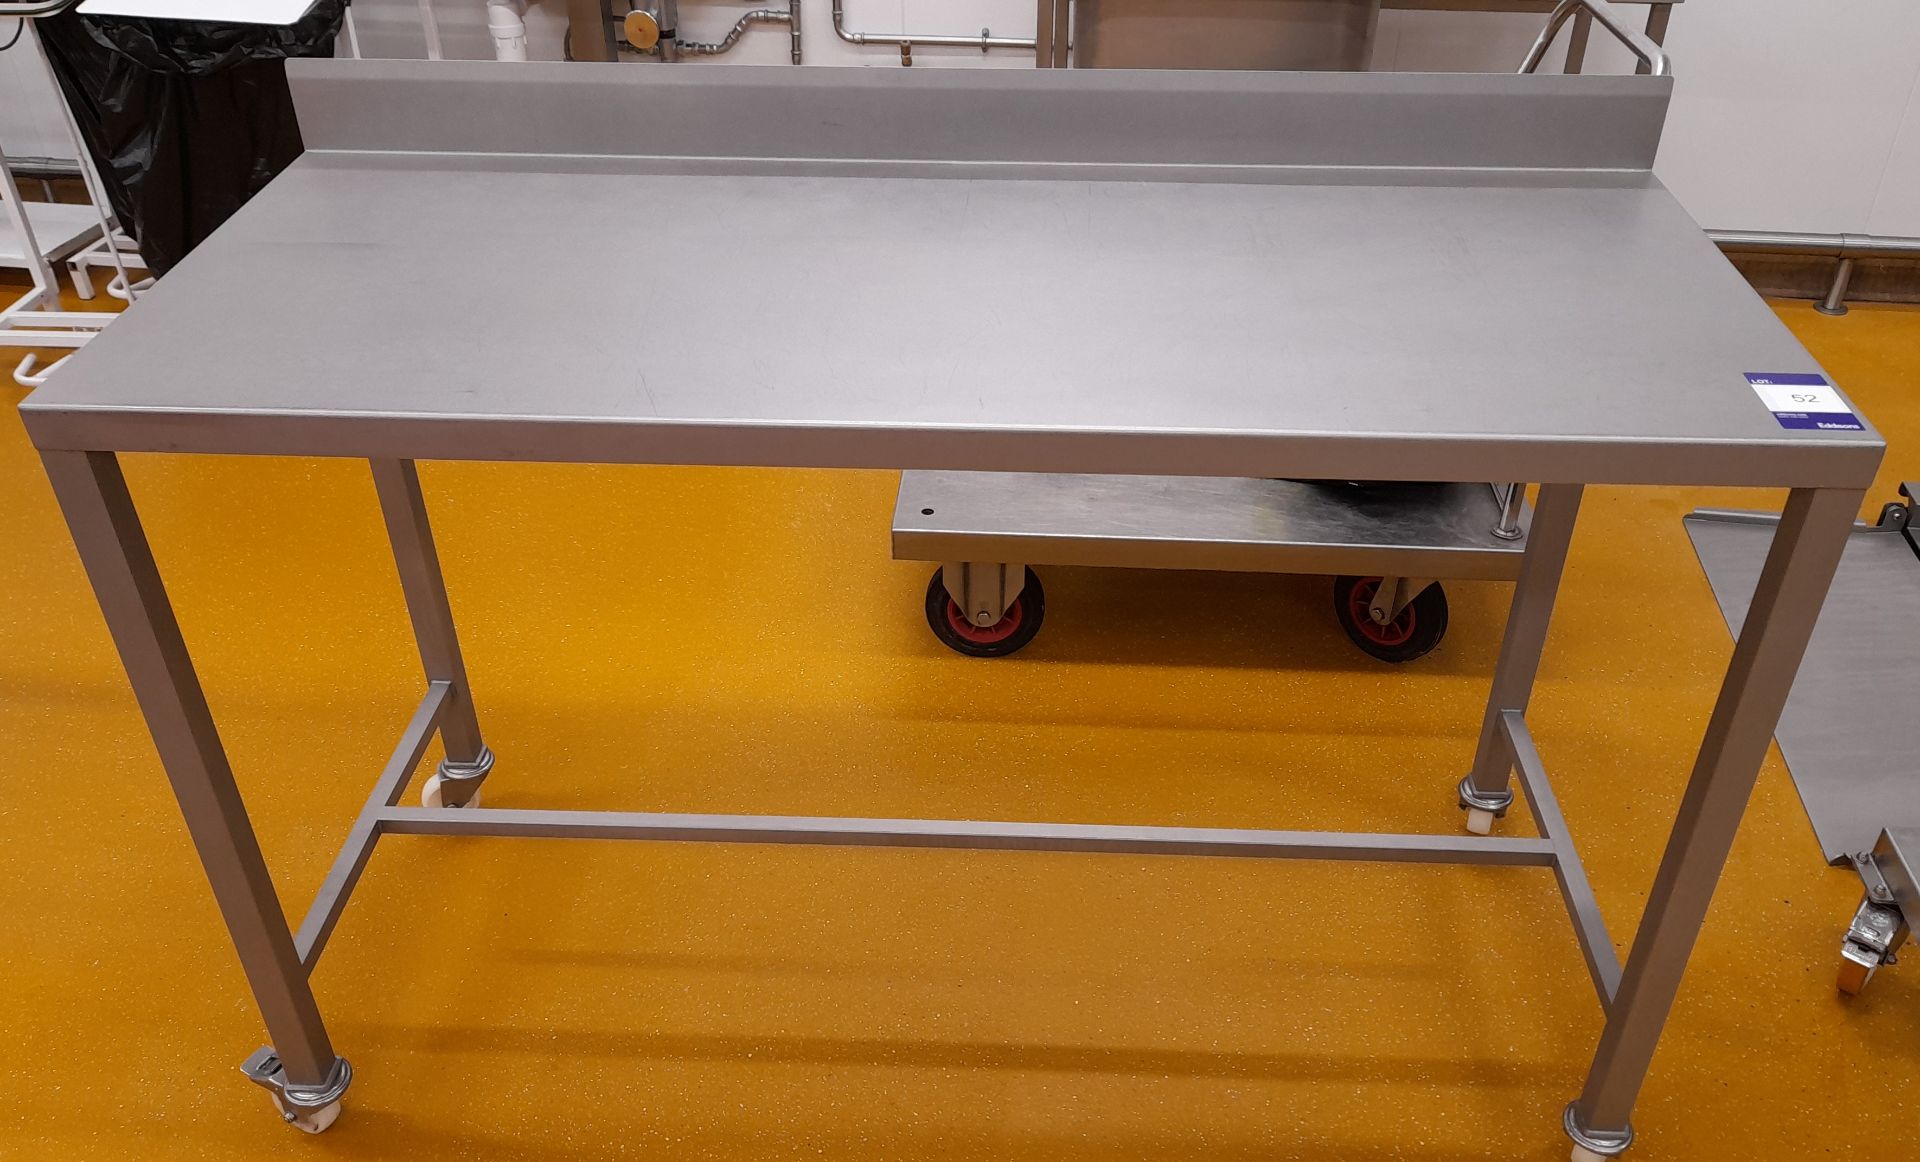 Mobile Stainless Steel prep table (1500 x 620)